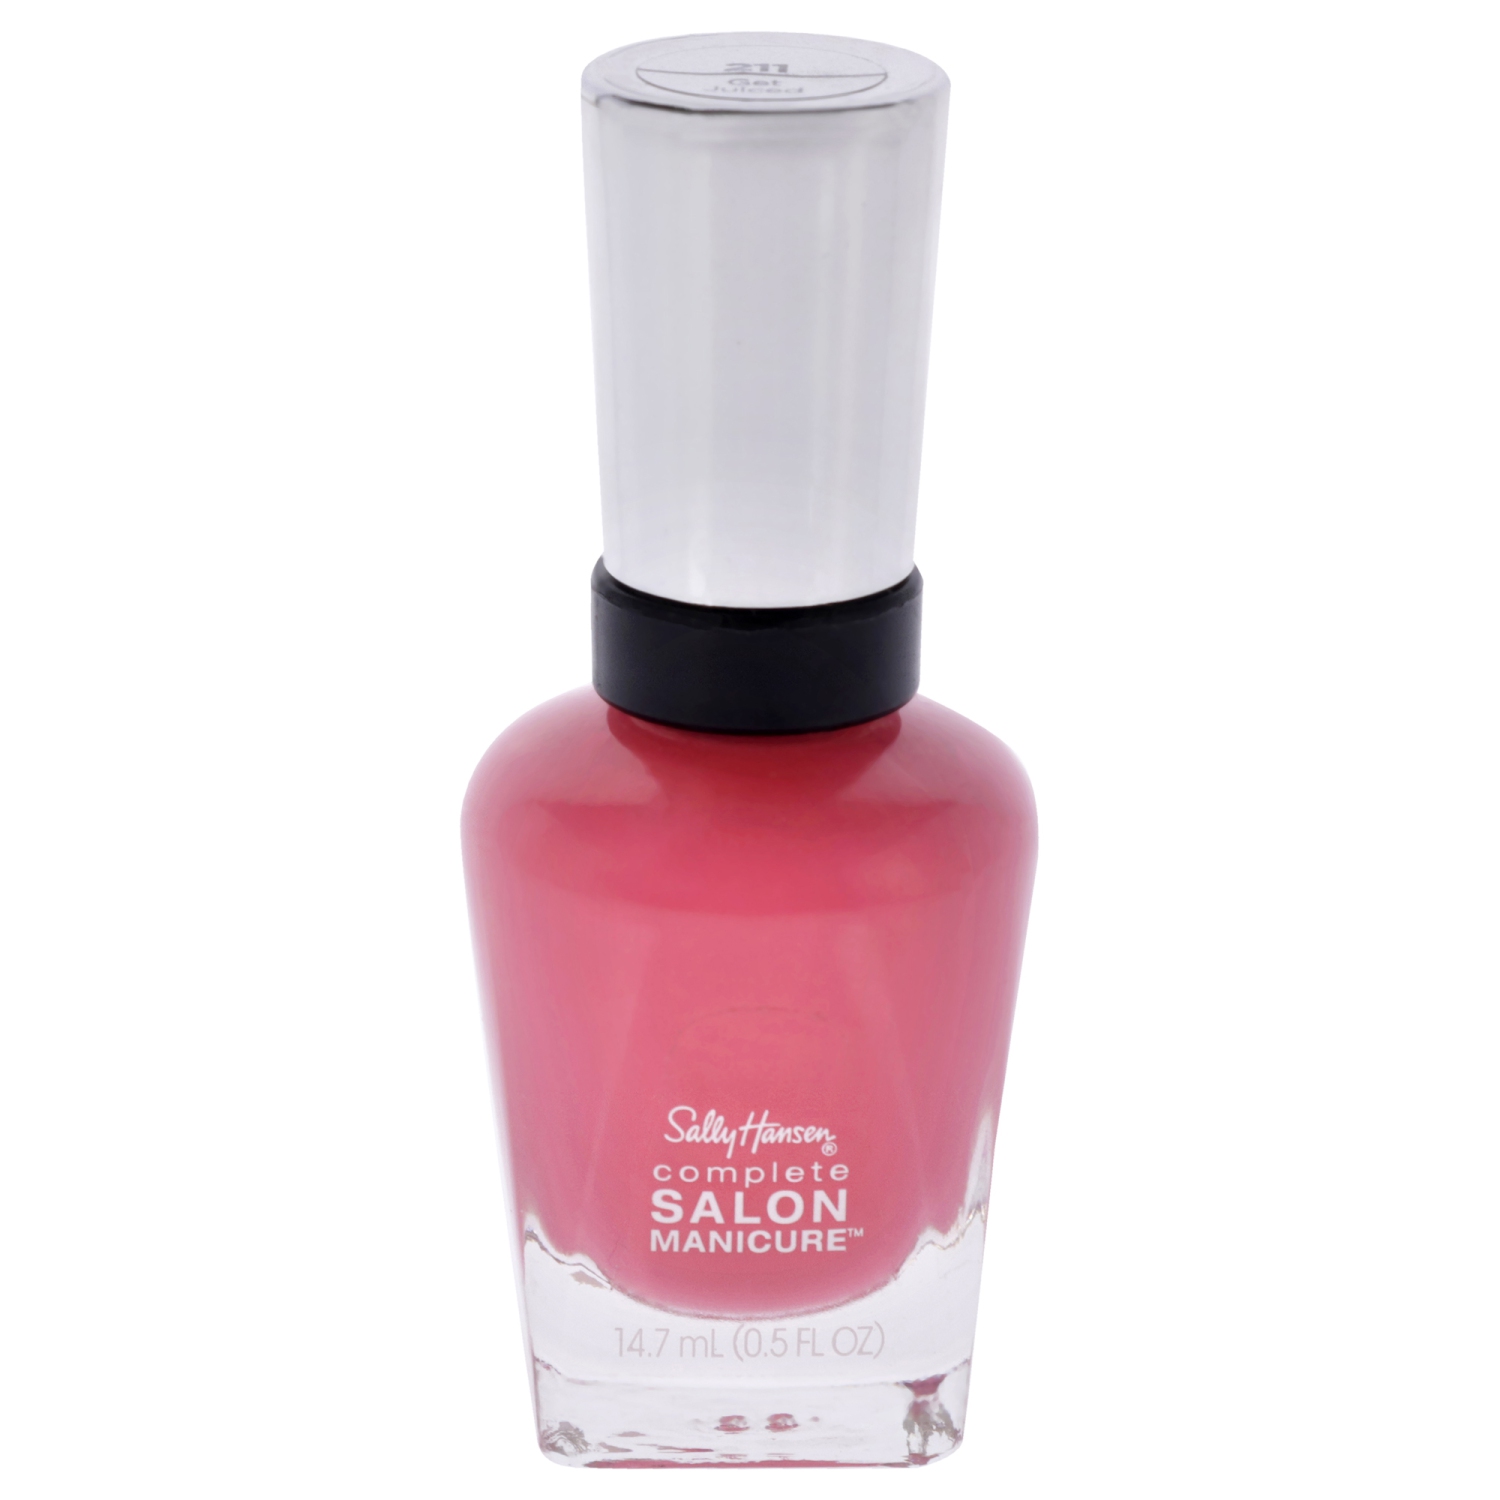 Complete Salon Manicure - 211 Get Juiced by Sally Hansen for Women - 0.5 oz Nail Polish